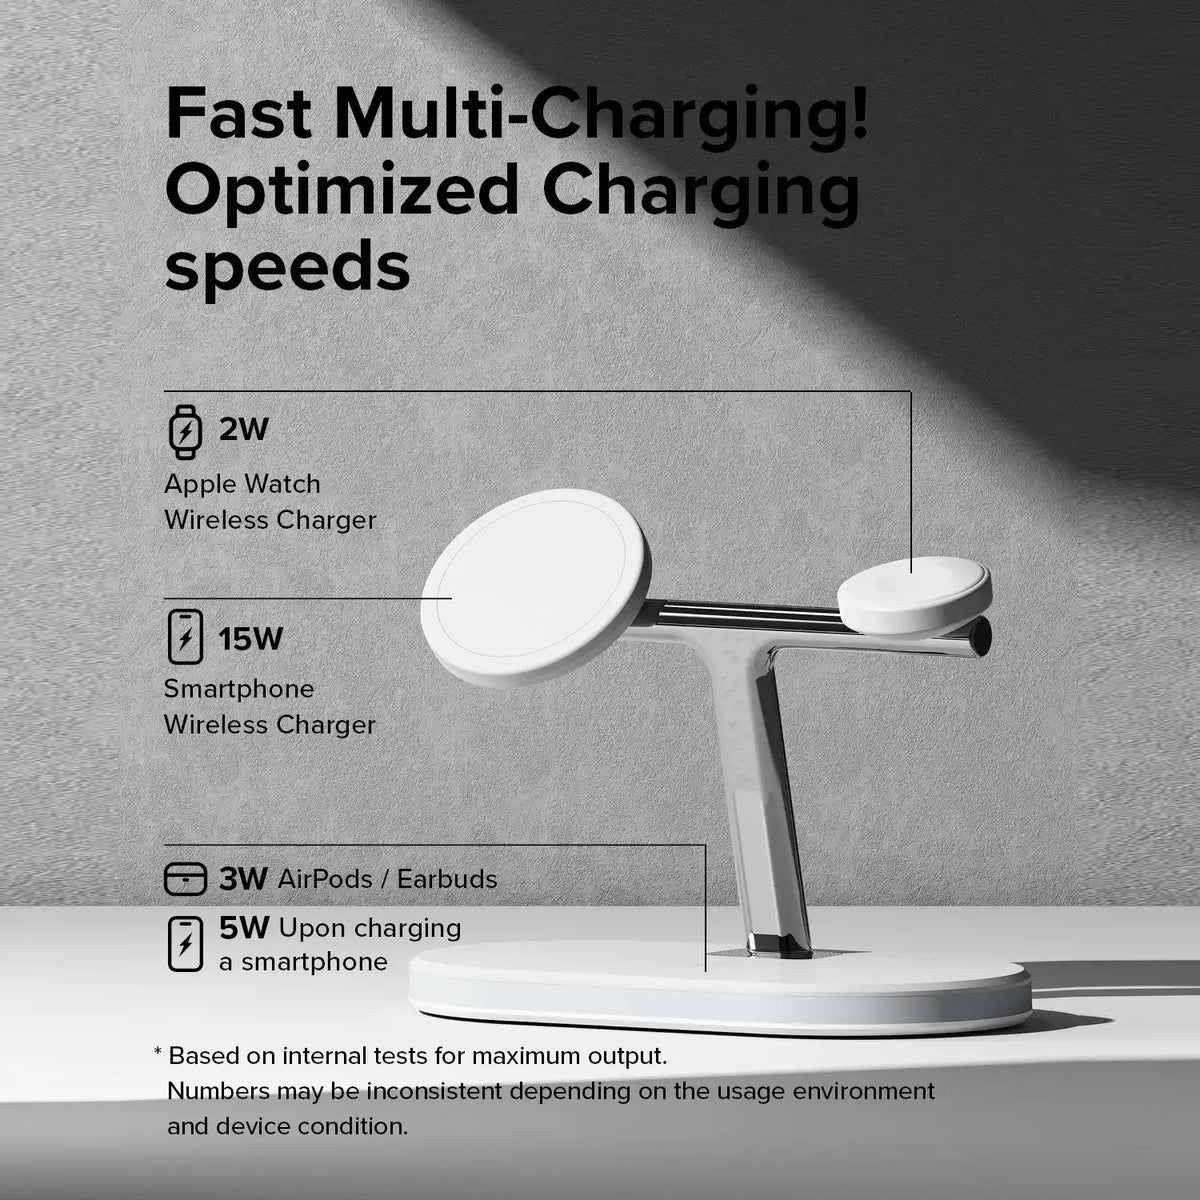 Ringke 3 in 1 Magnetic Wireless Charging Stand